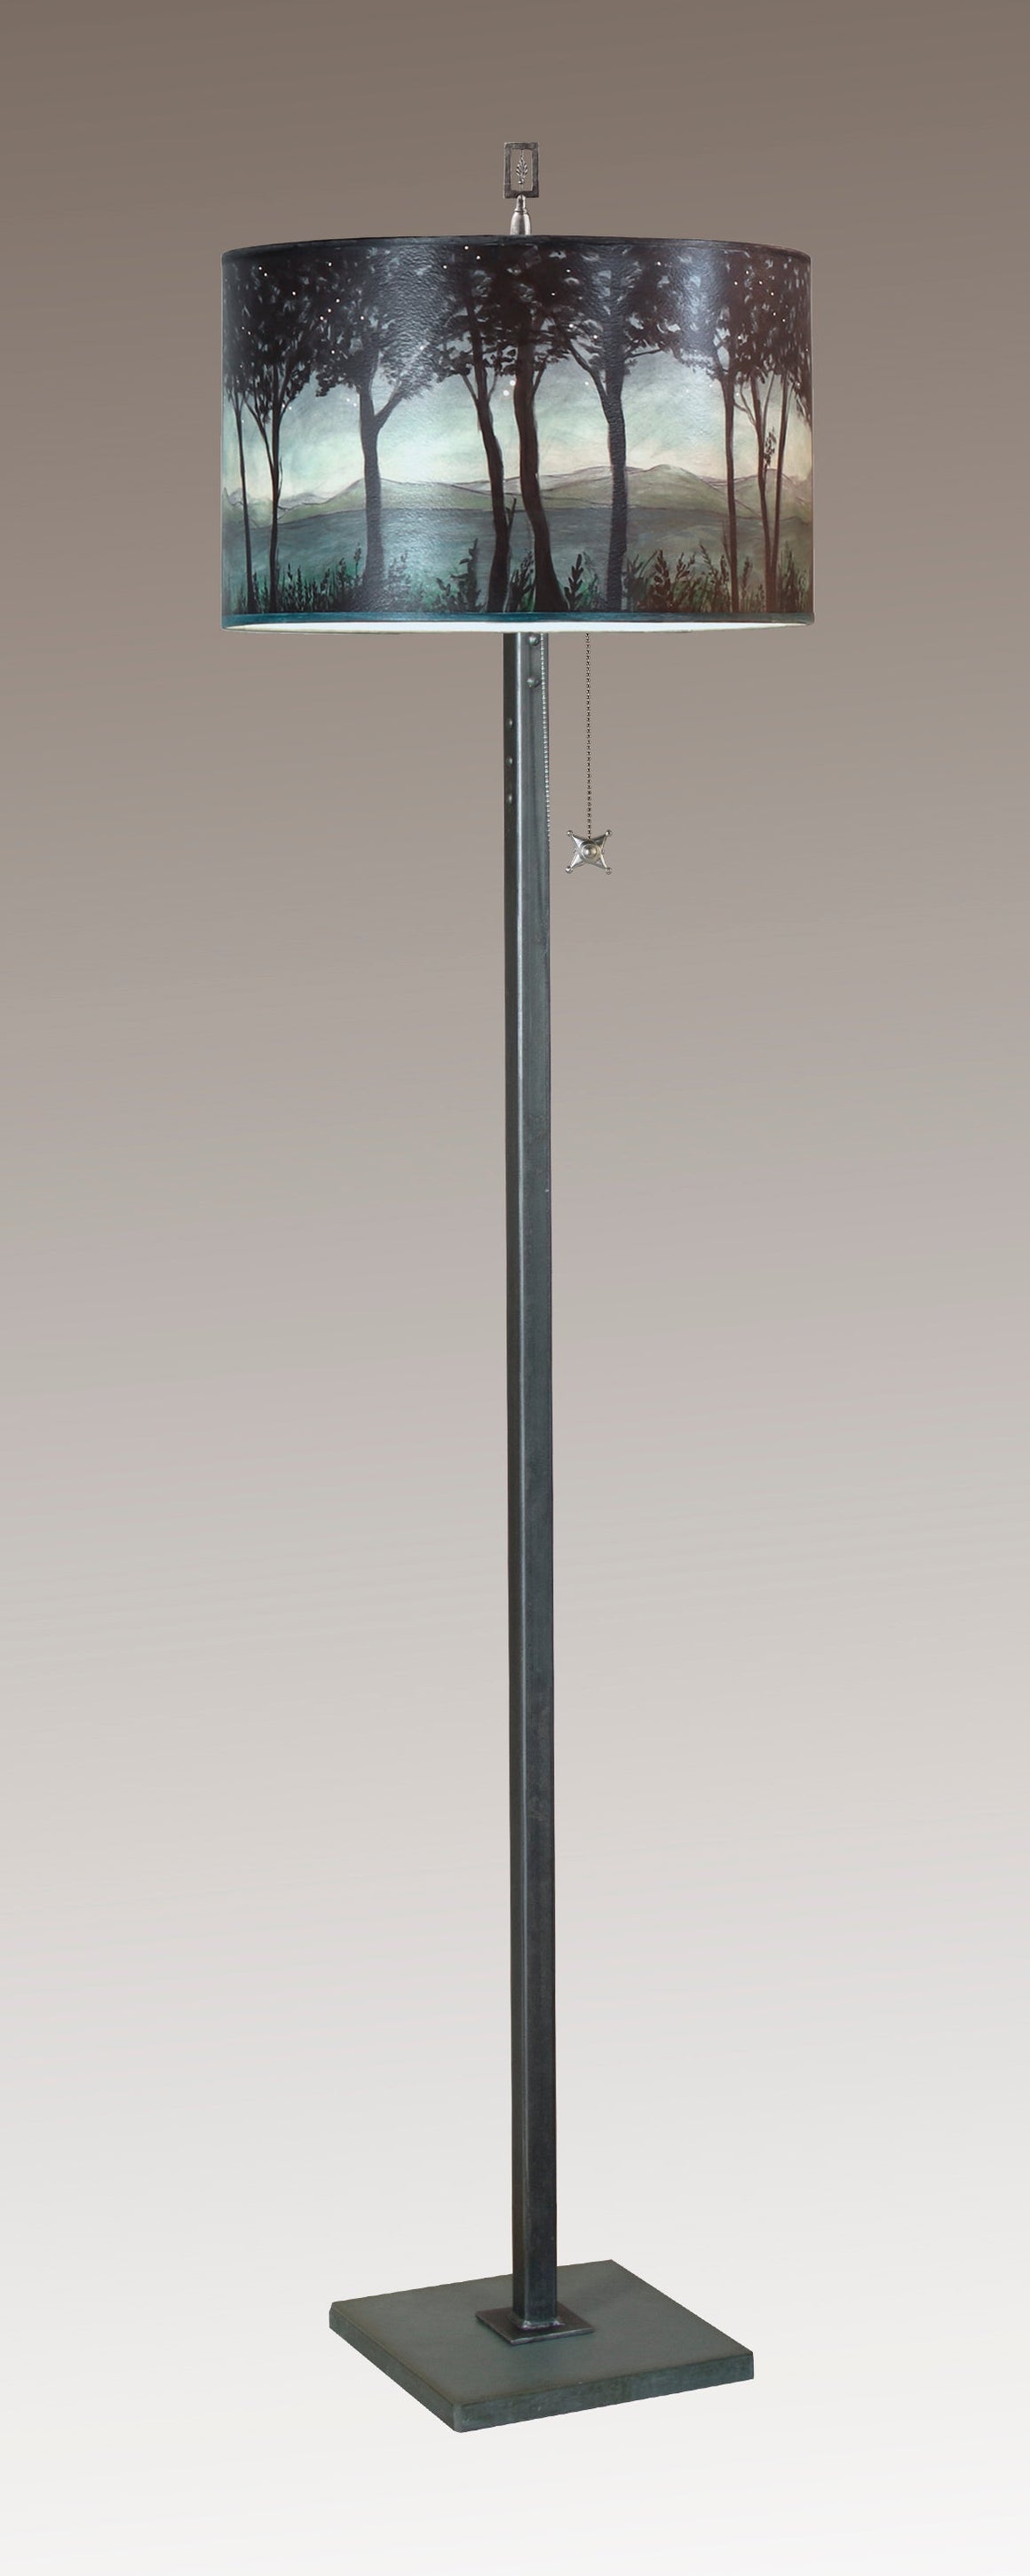 Steel Floor Lamp with Large Drum Shade in Twilight